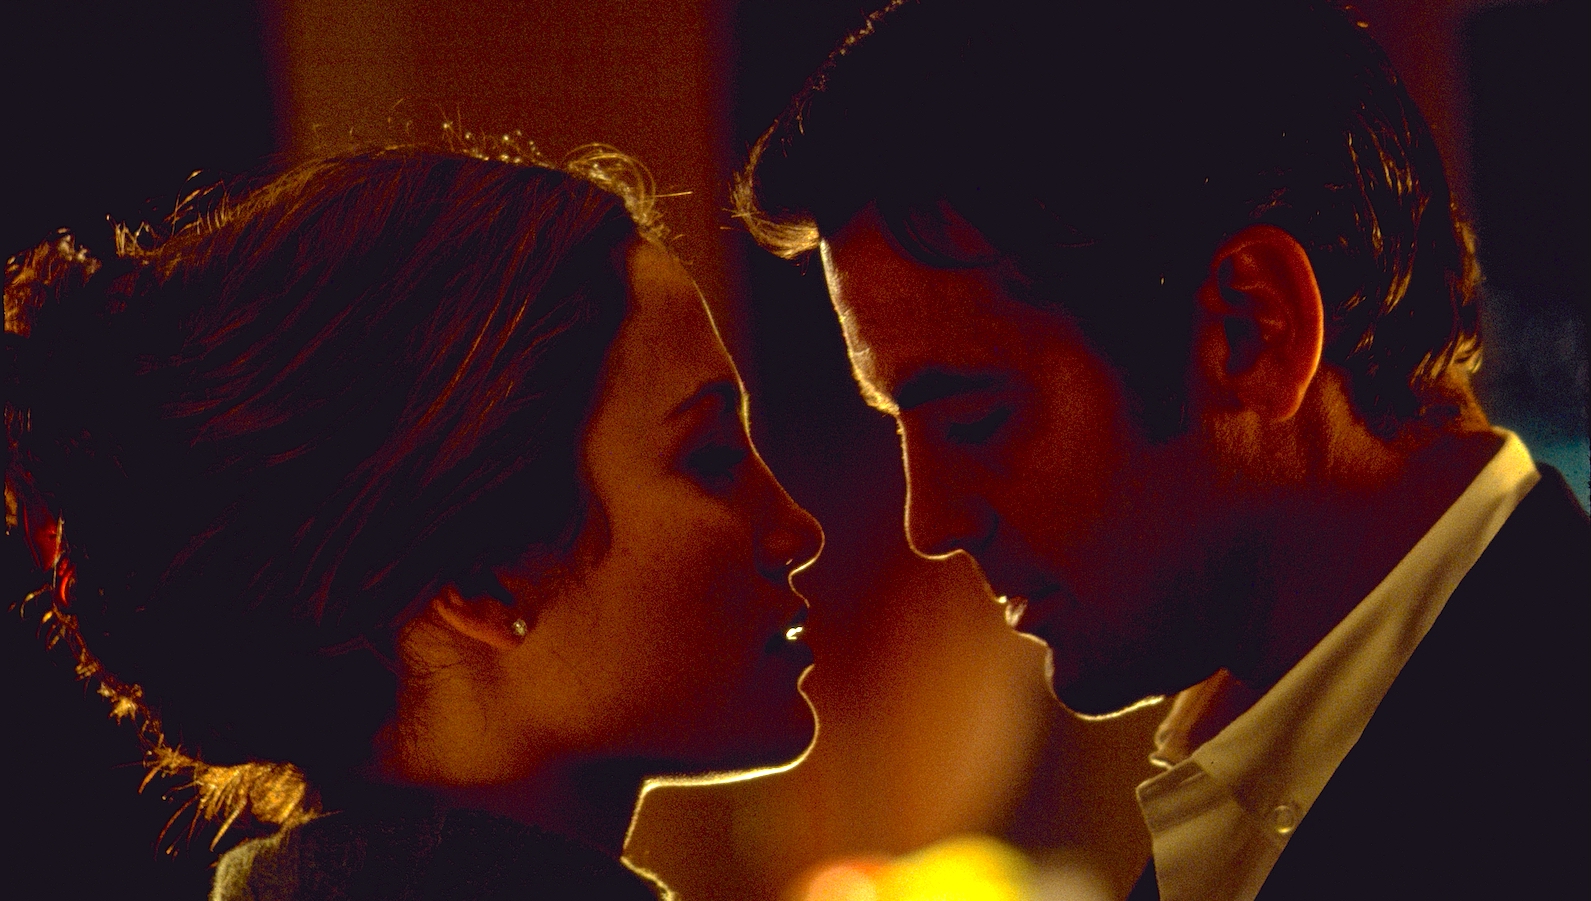 A close up of a man and woman looking at each other in a dark room in profile, ready to kiss